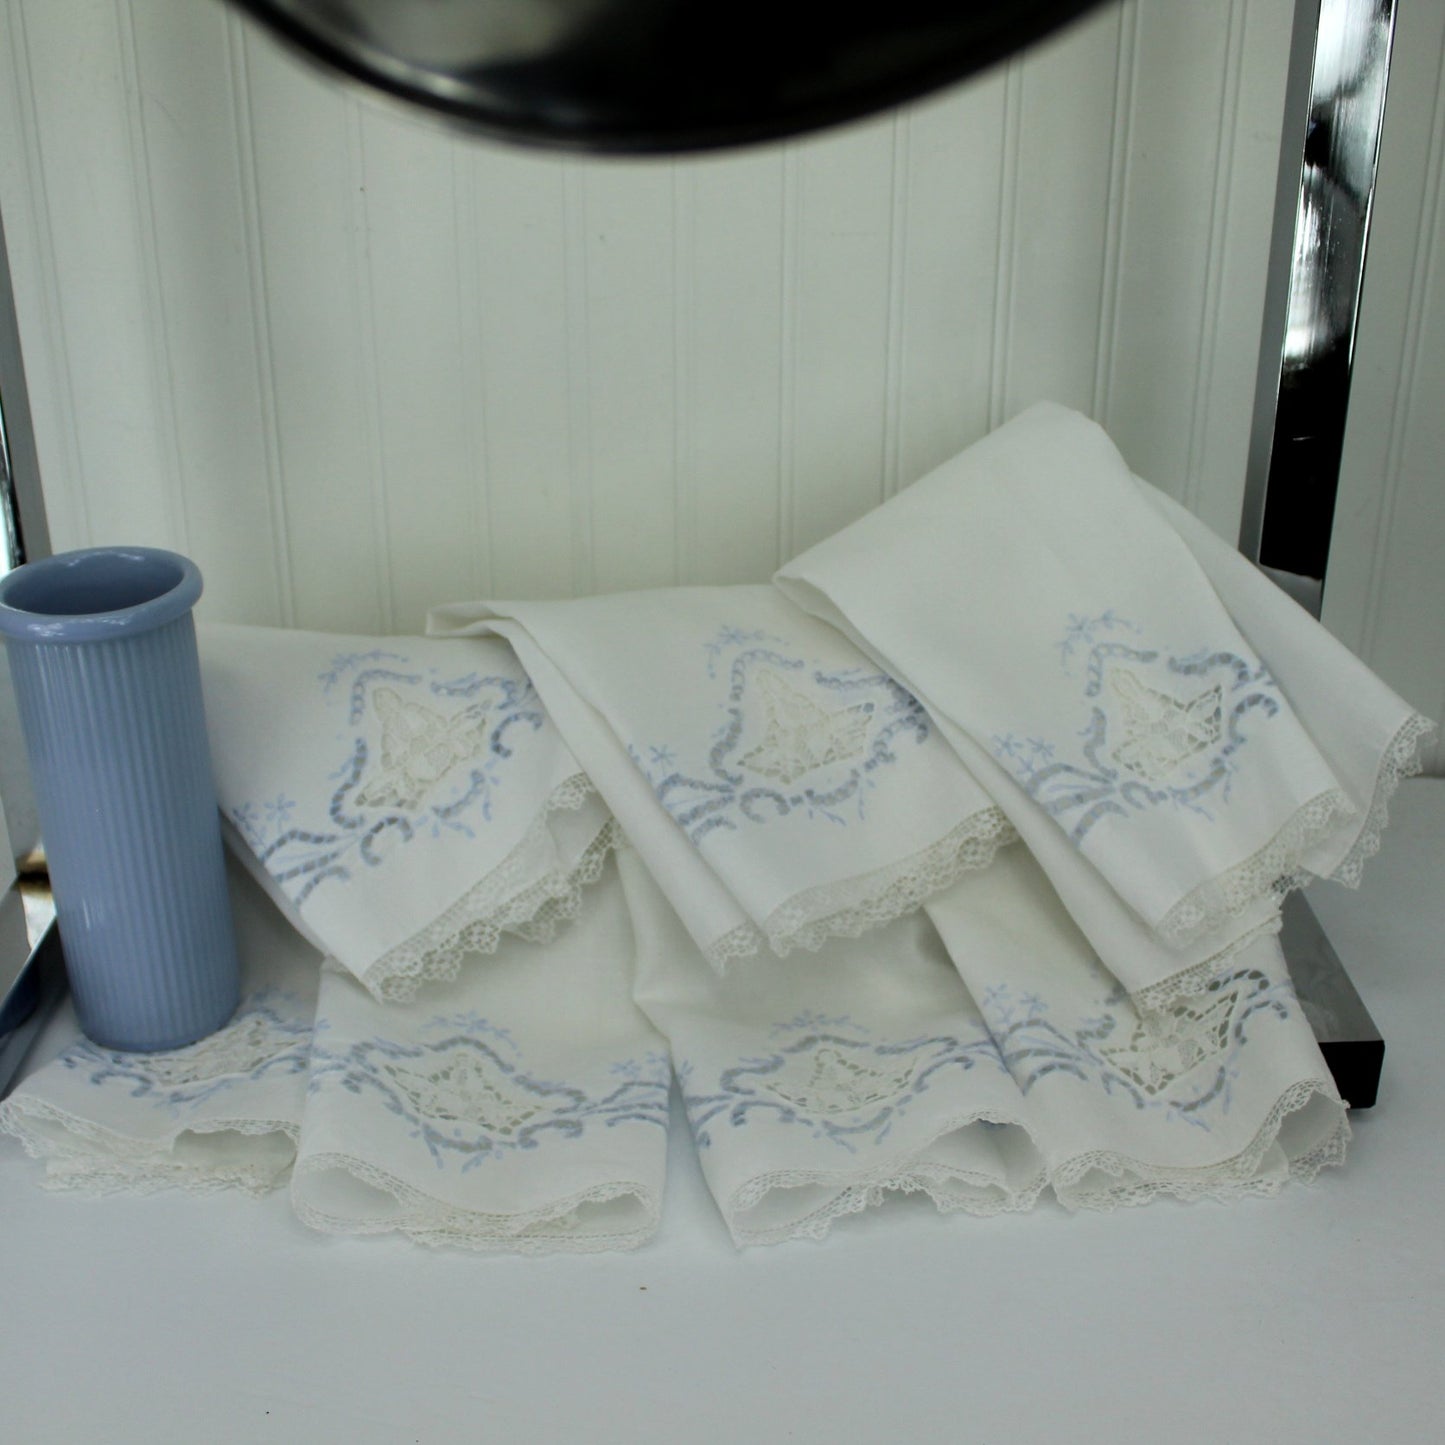 Collection 7 Guest Finger Towels White LInen Blue Embroidery Cutwork DIY Project Repurpose nice collection serene little napkins towels